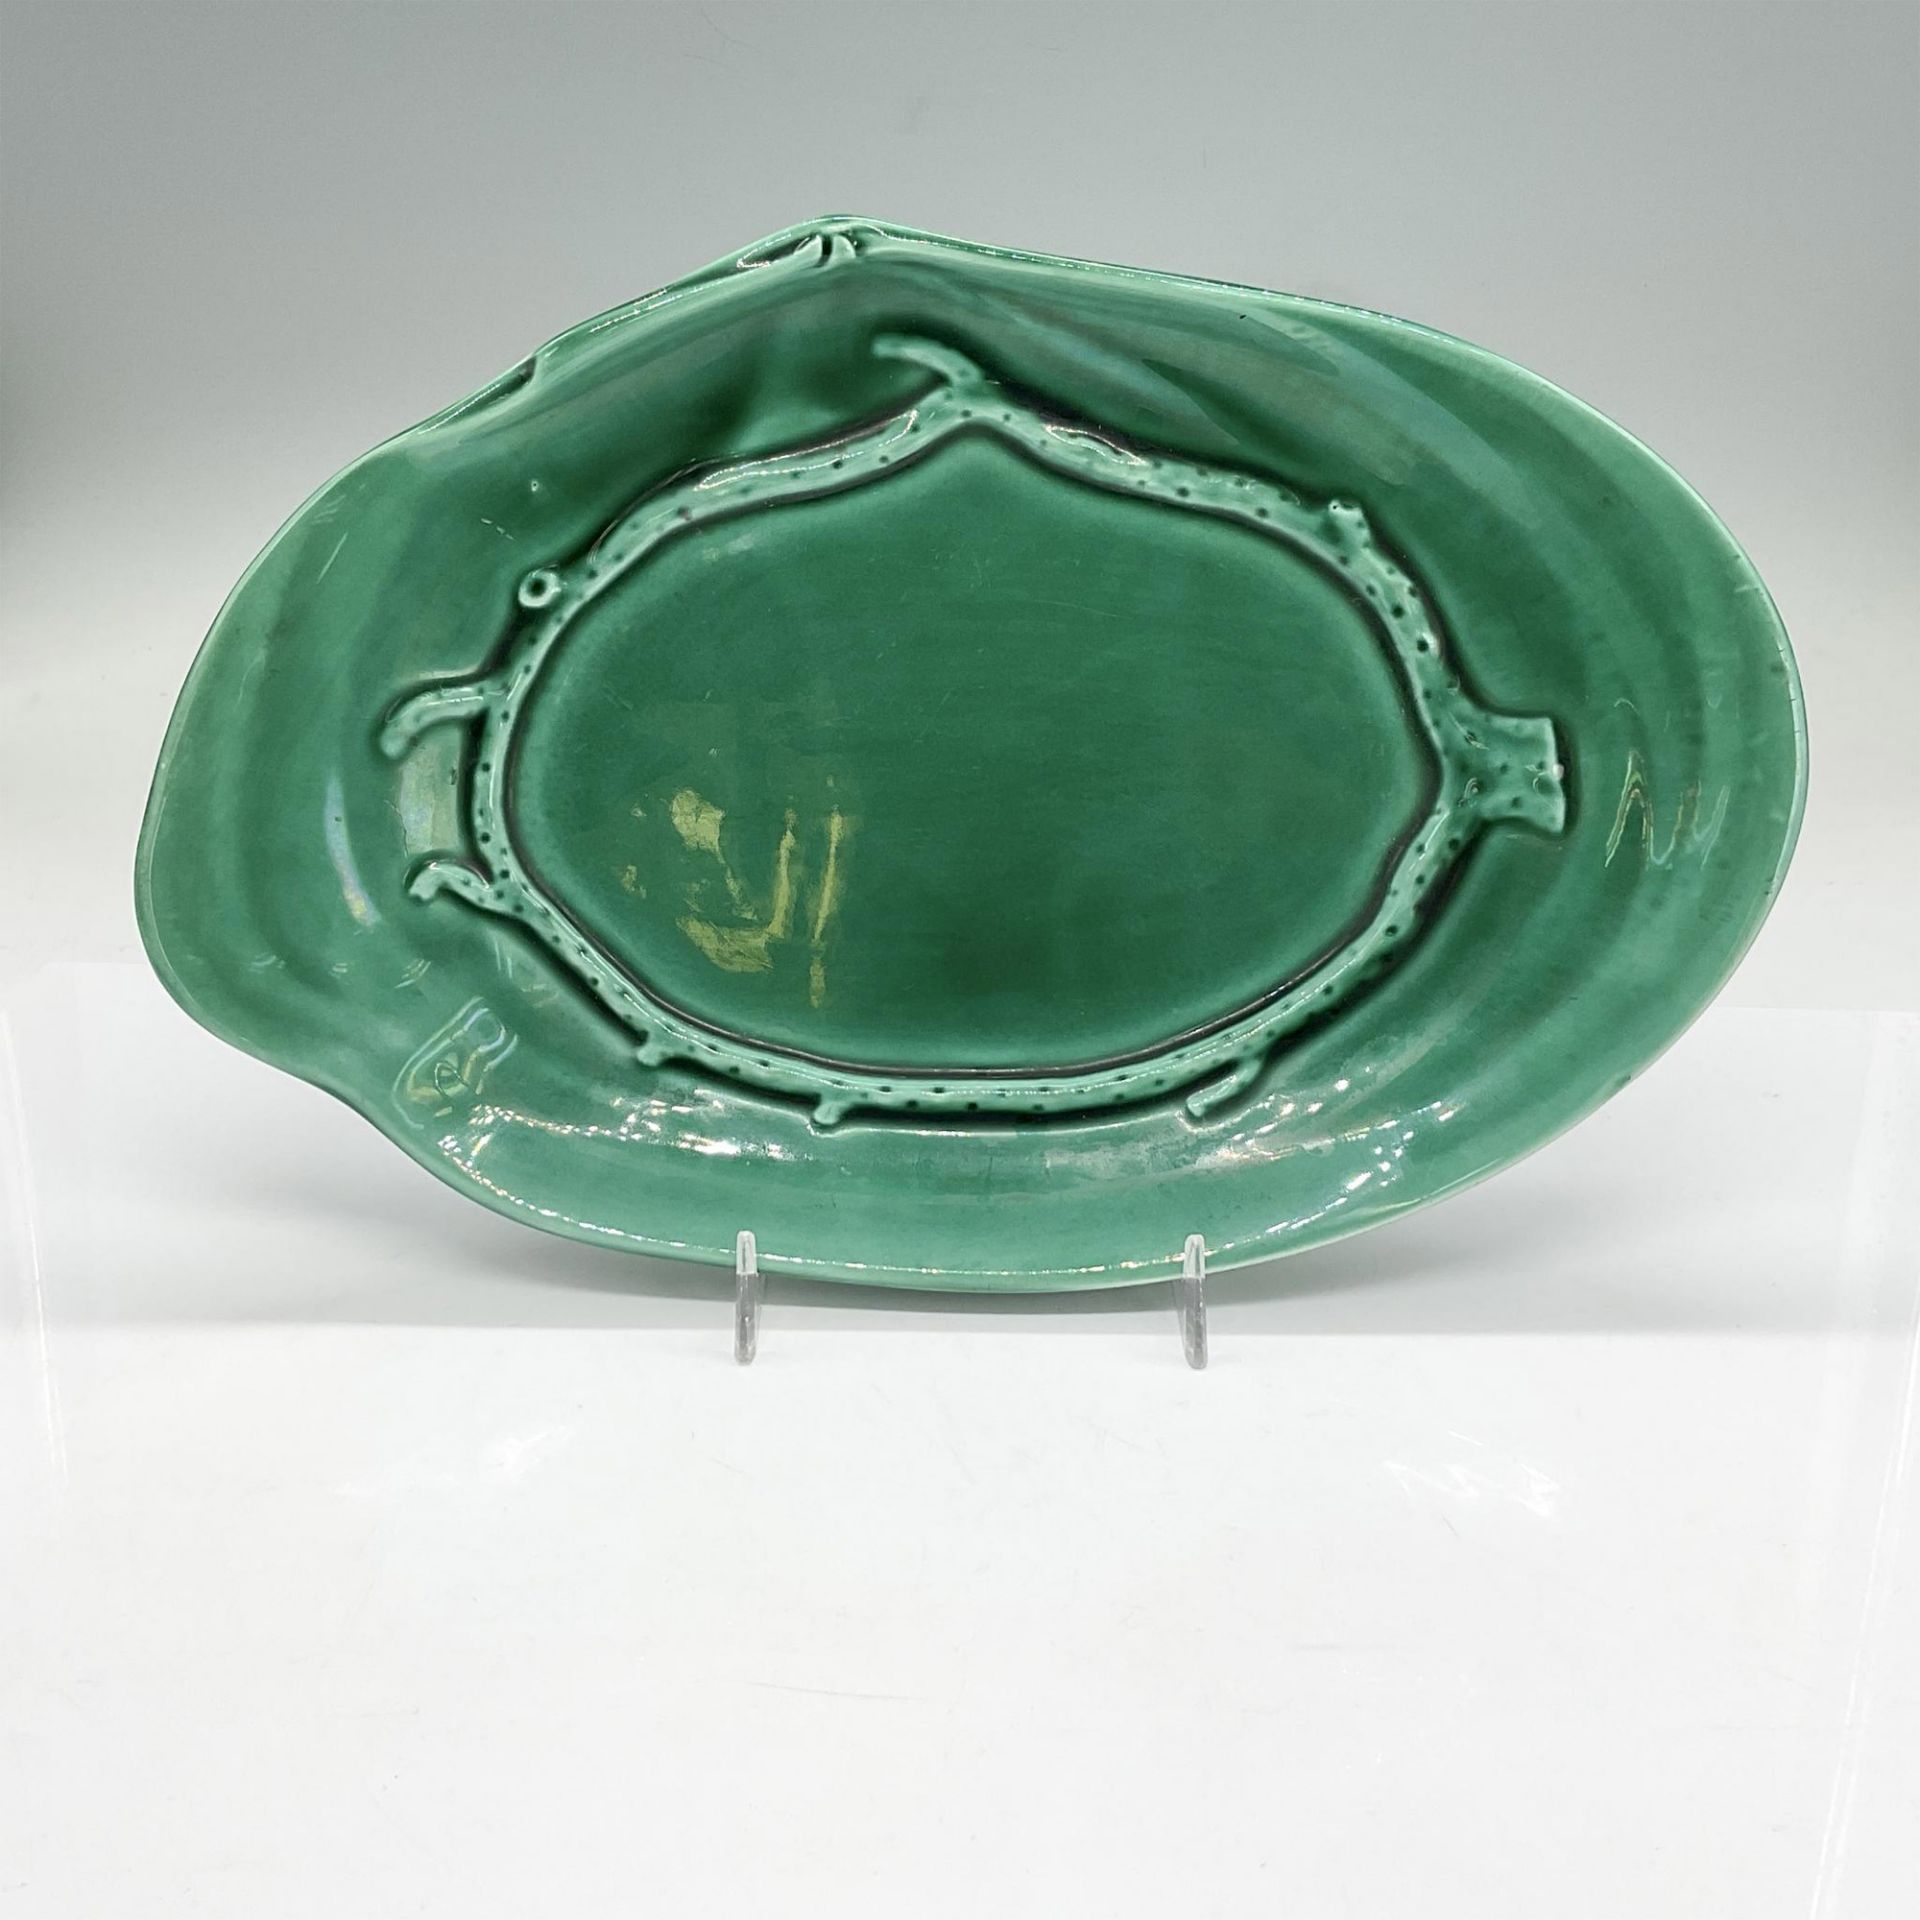 2pc Wedgwood of Etruria Green Glazed Footed Bowl + Plate - Image 5 of 6